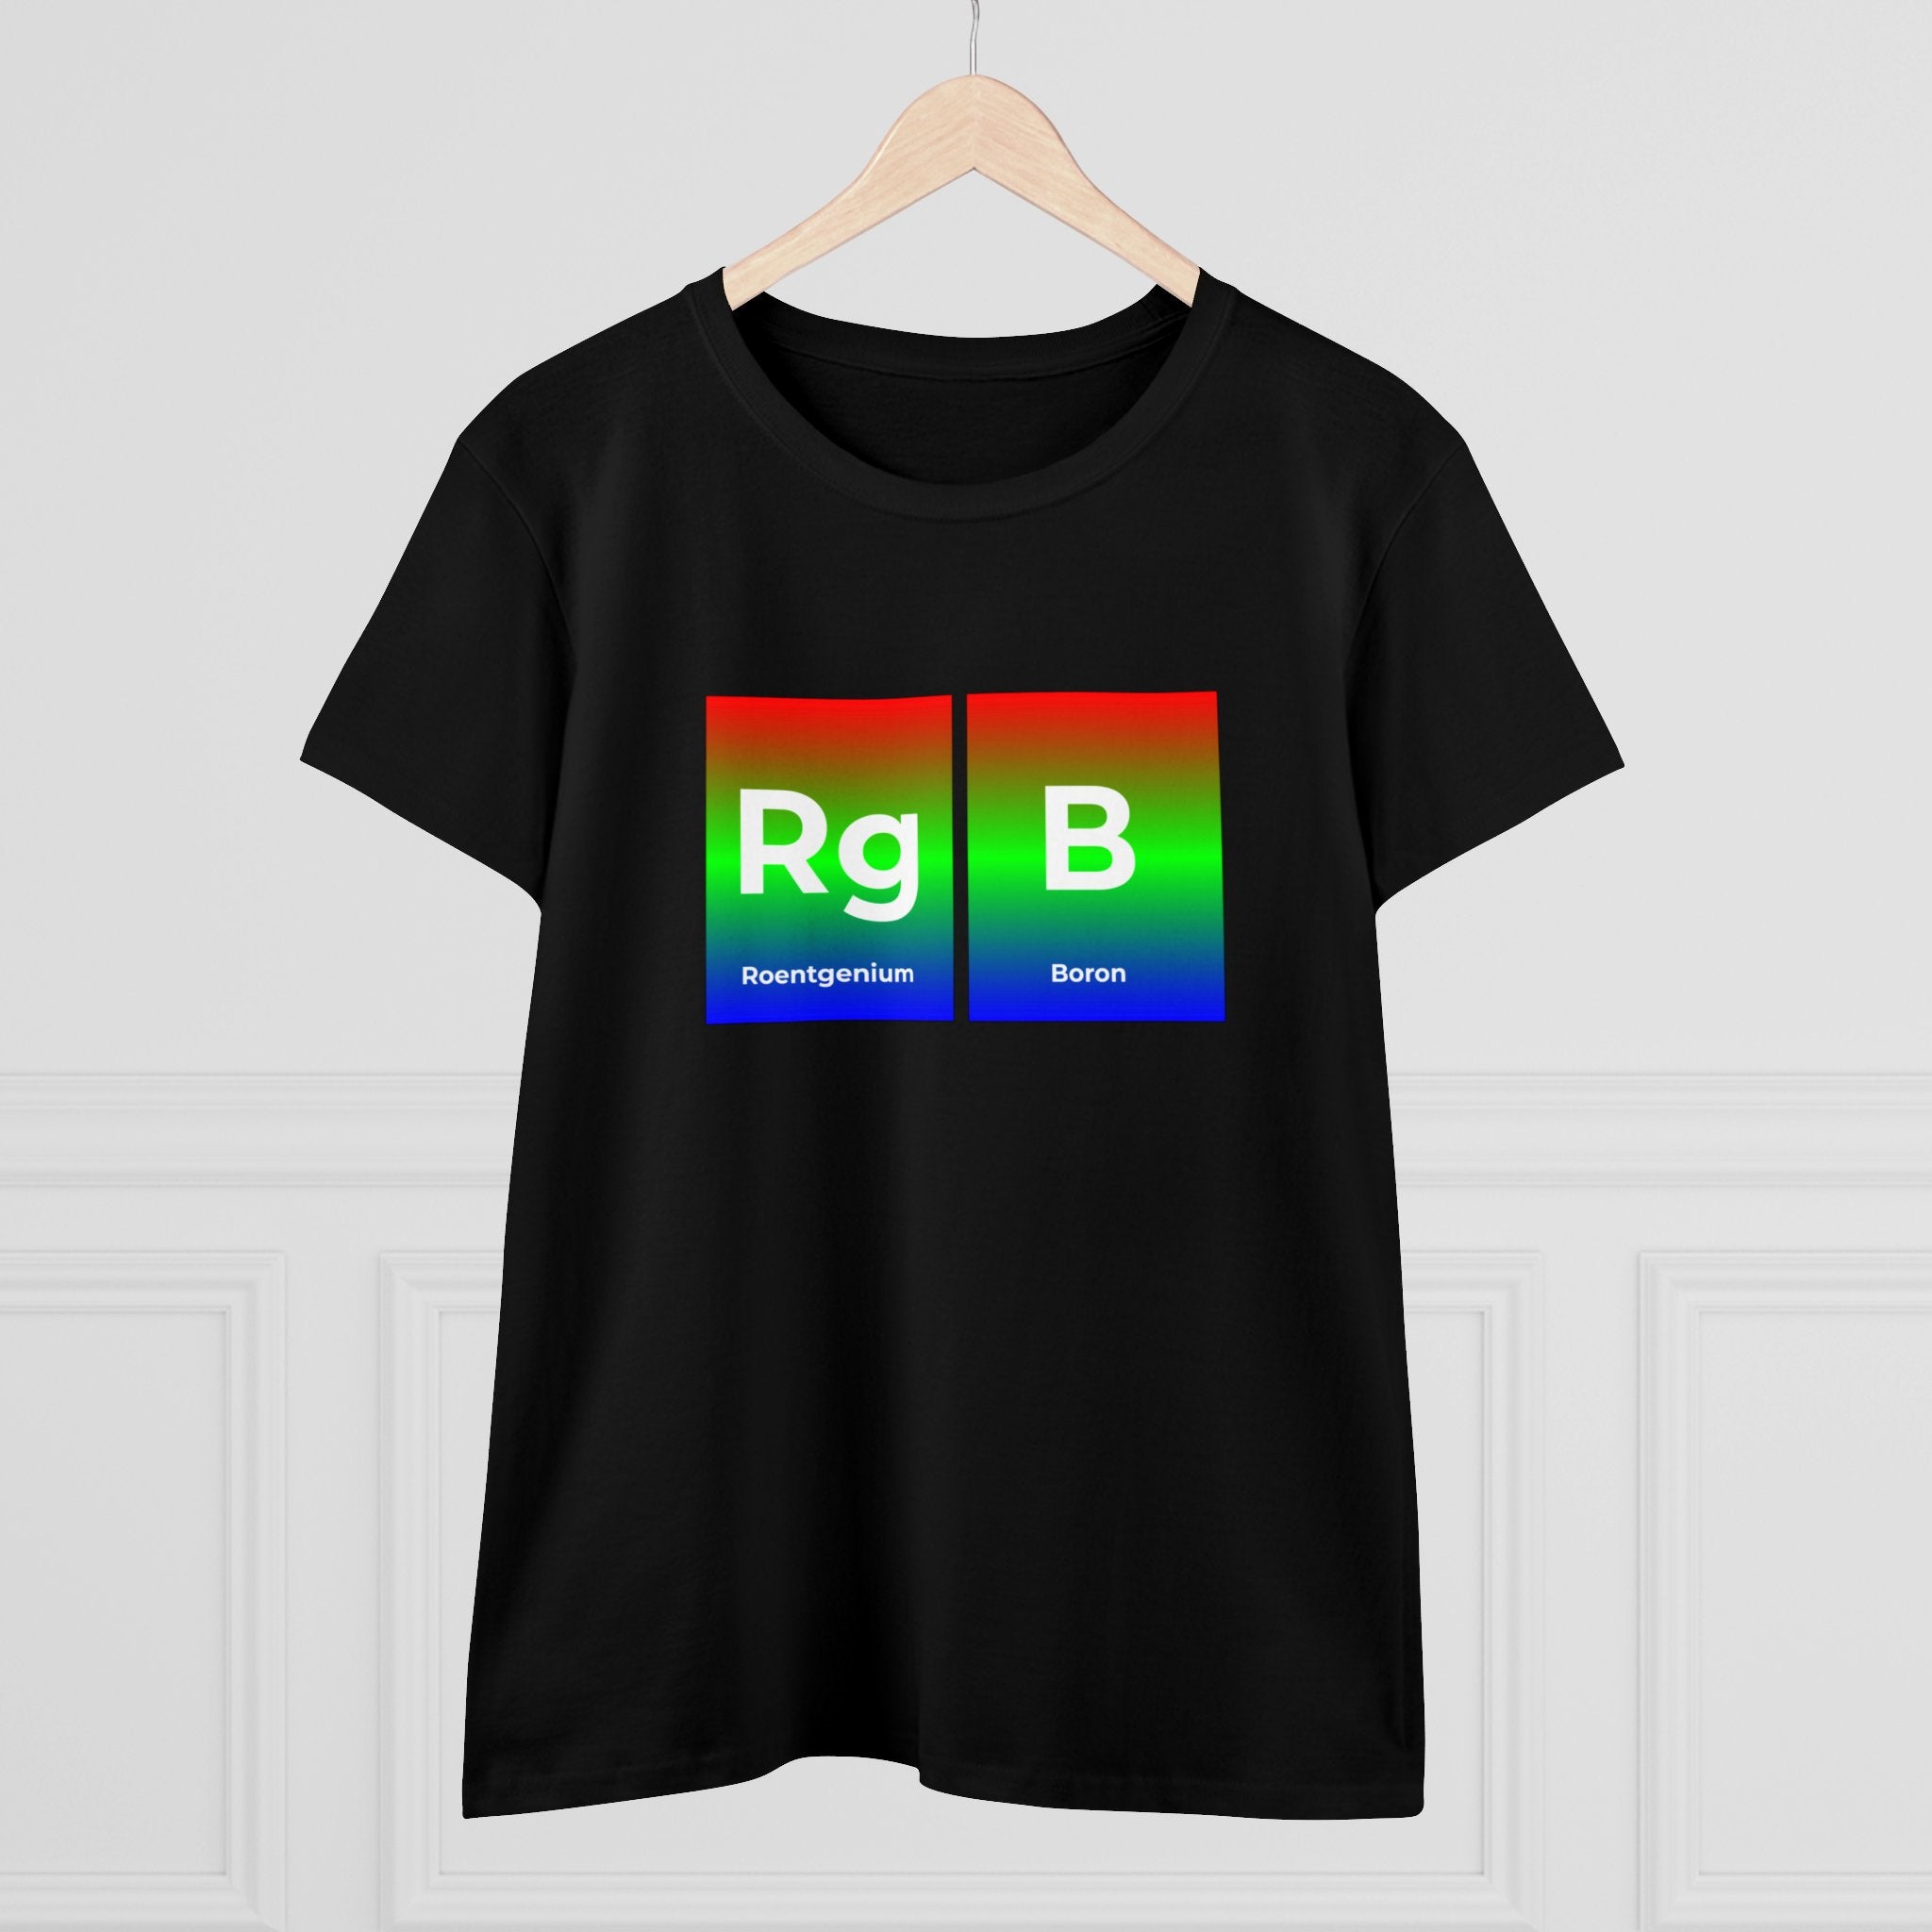 RG-B - Women's Tee in black cotton, featuring chemical symbols "Rg" for Roentgenium and "B" for Boron displayed in RGB color gradient boxes, hanging on a wooden hanger. This piece is a perfect addition to any ethical fashion wardrobe.